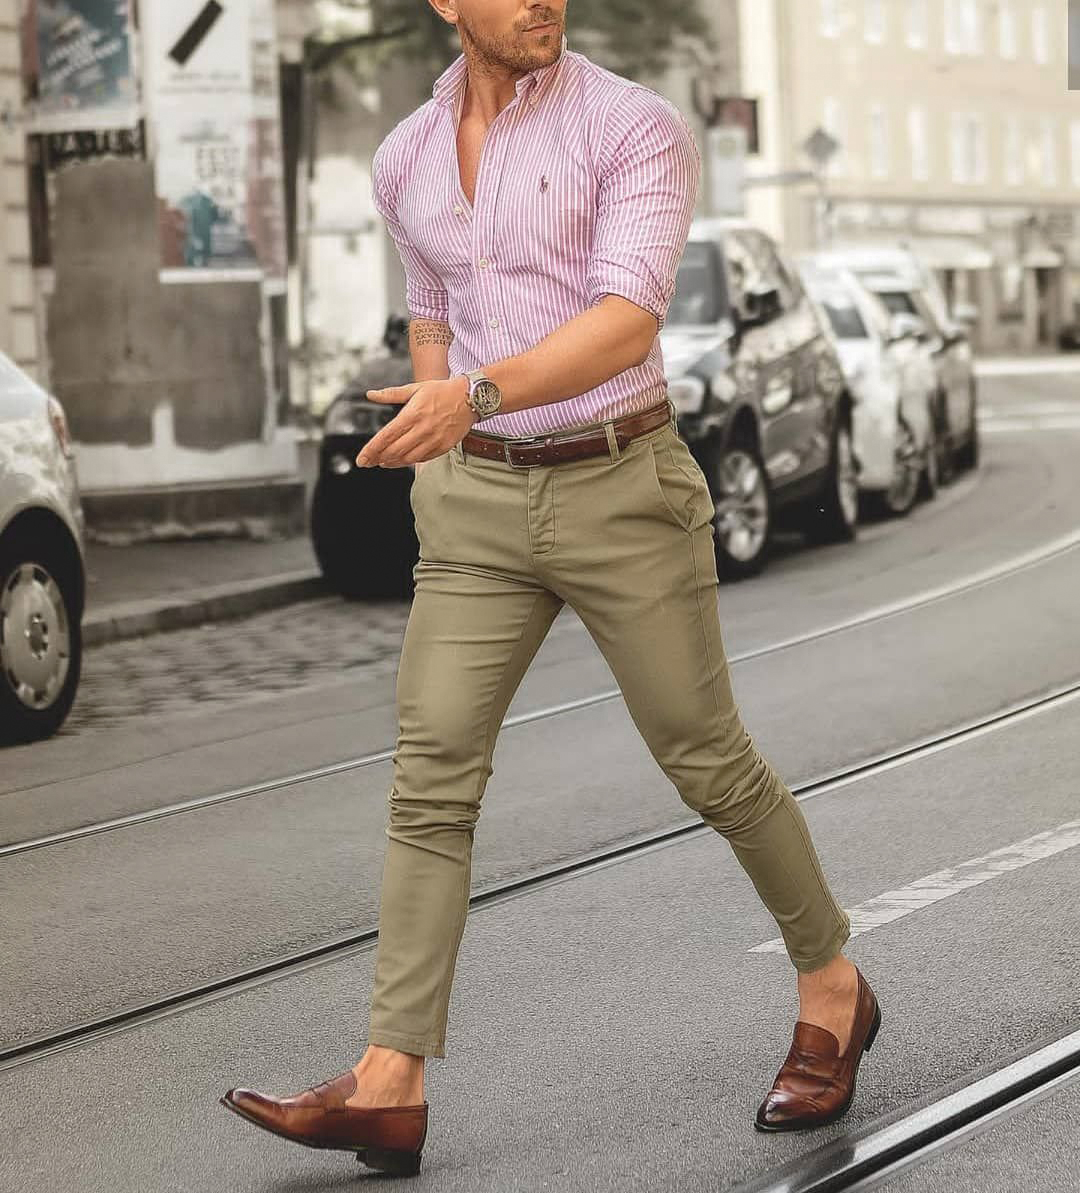 matching striped pink dress shirt with khaki pants and brown loafers